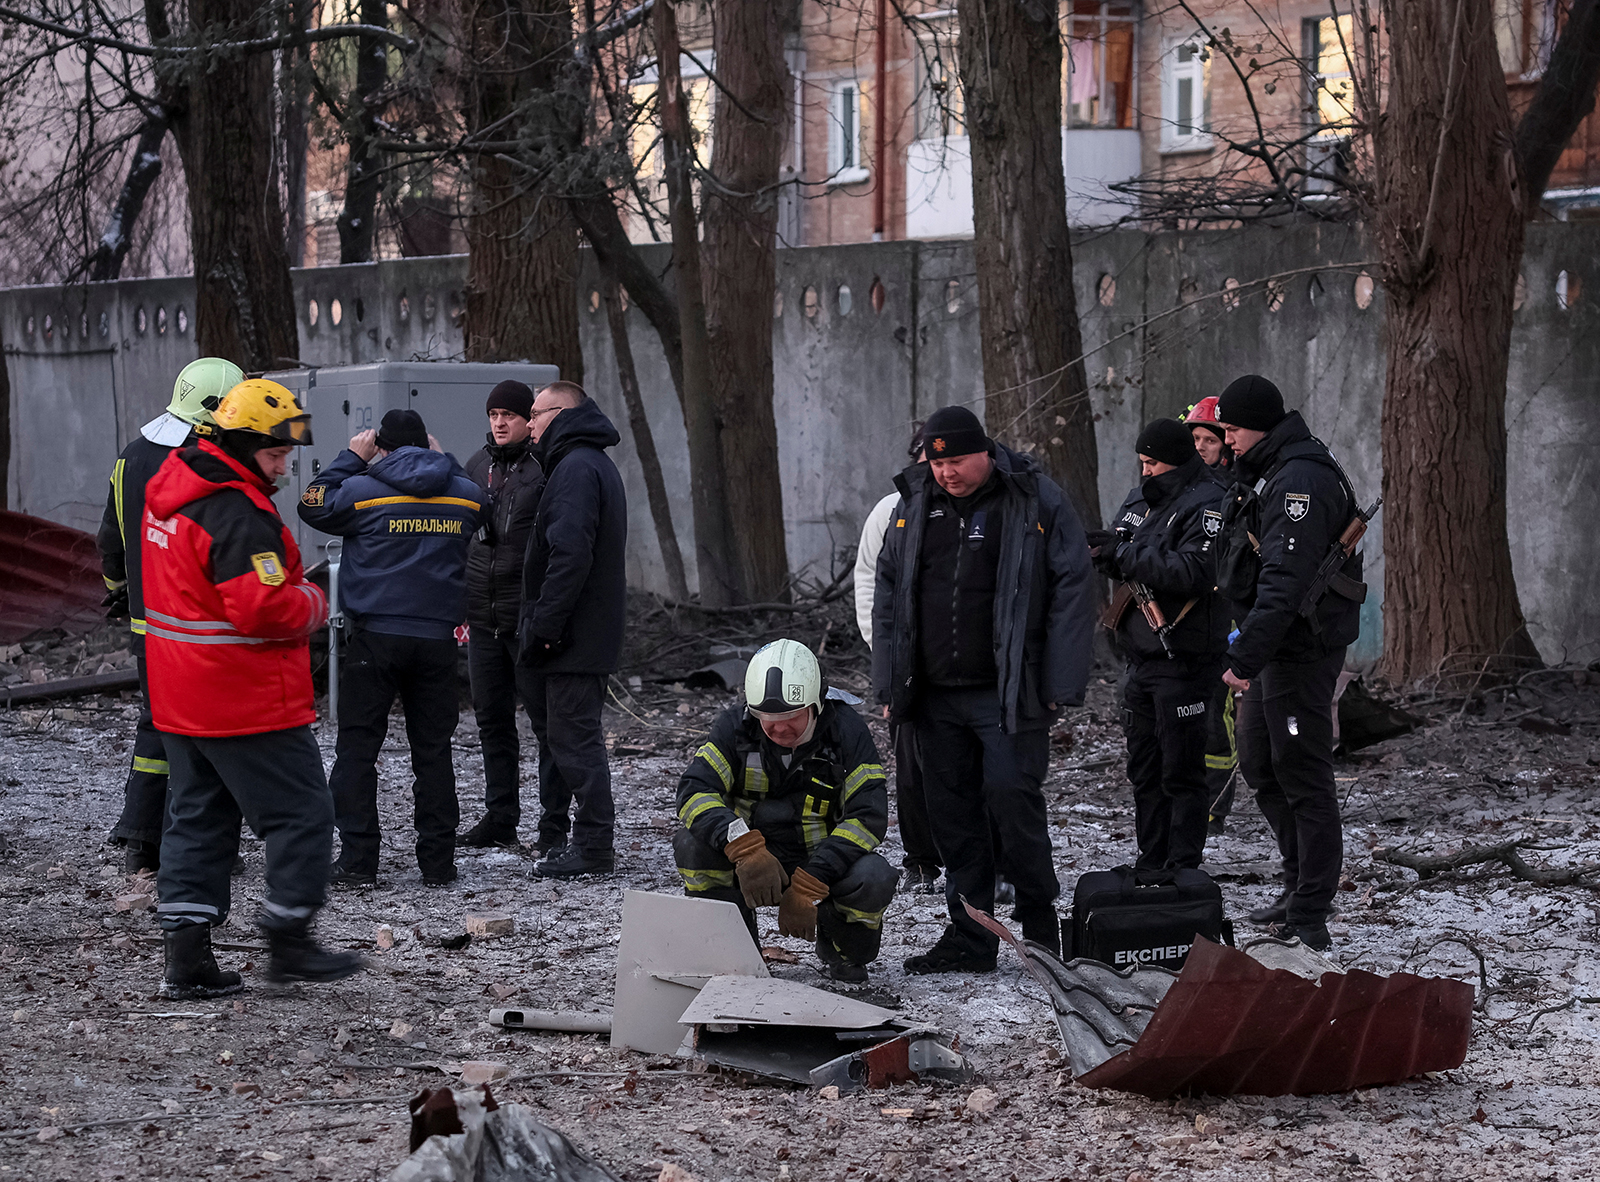 Rescuers and police officers examine parts of the drone at the site of a building destroyed by a Russian drone attack in Kyiv on Wednesday.